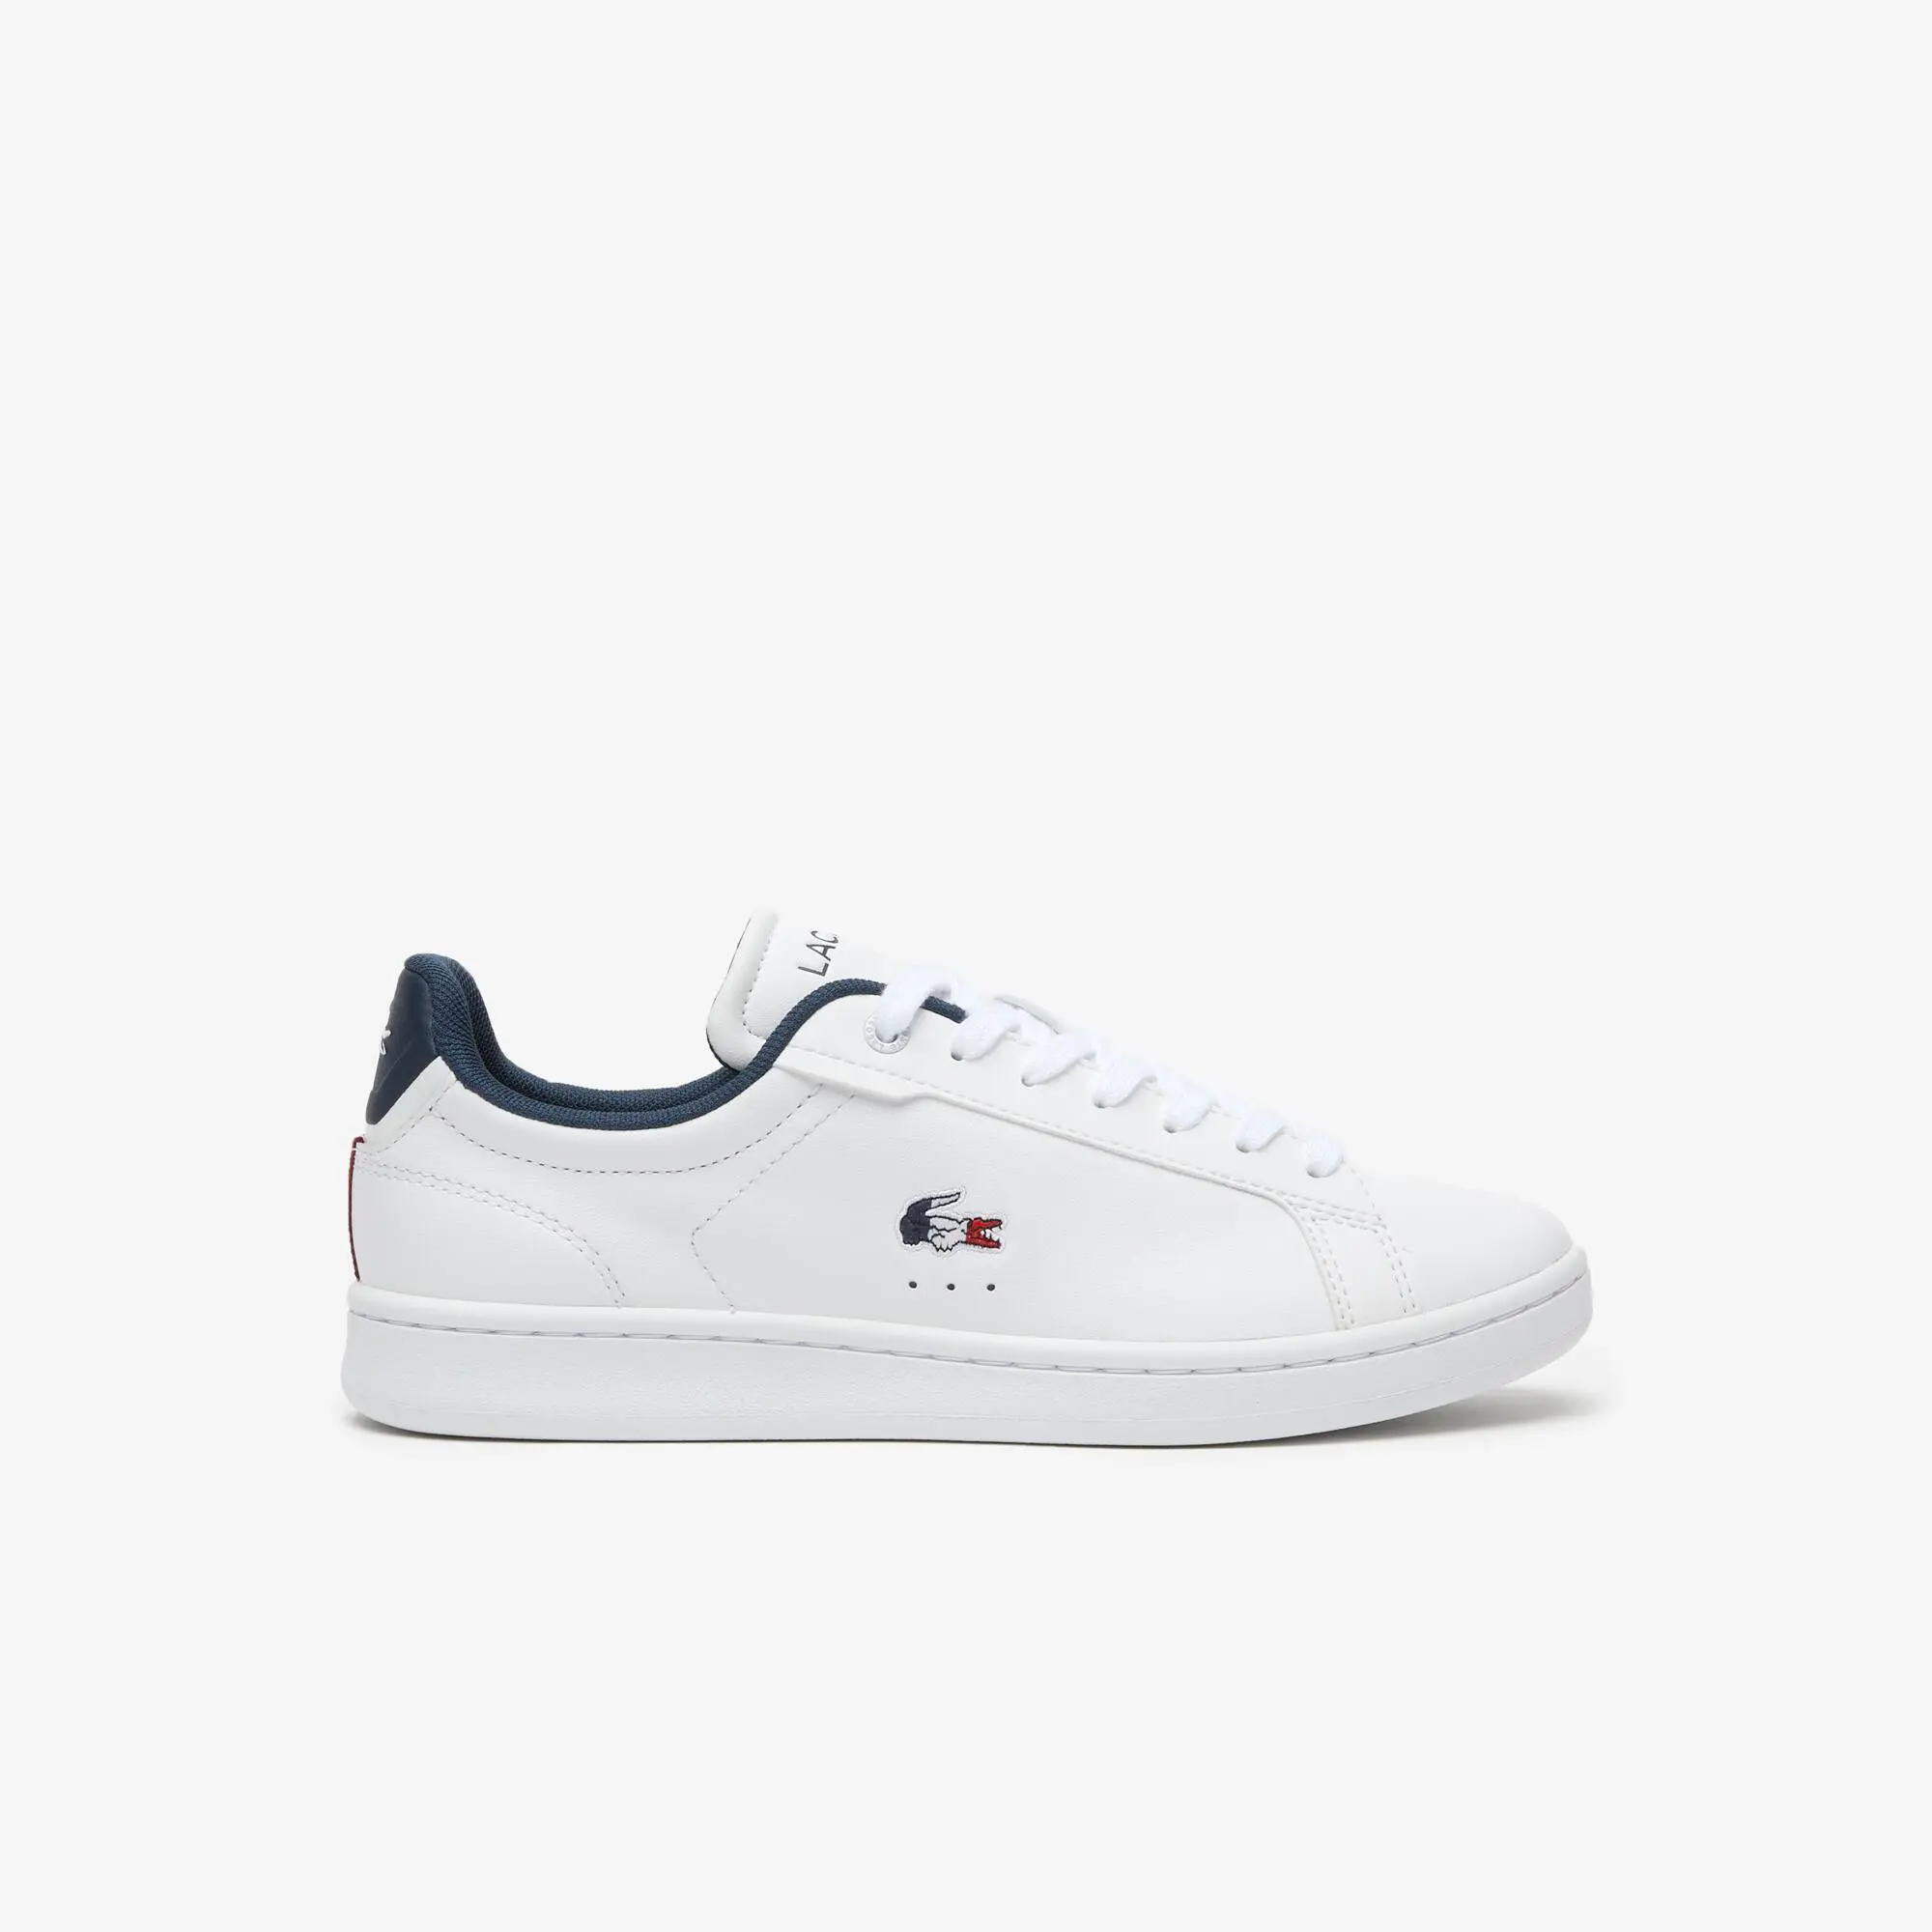 Lacoste Women's Lacoste Carnaby Pro Leather Tricolour Trainers. 1